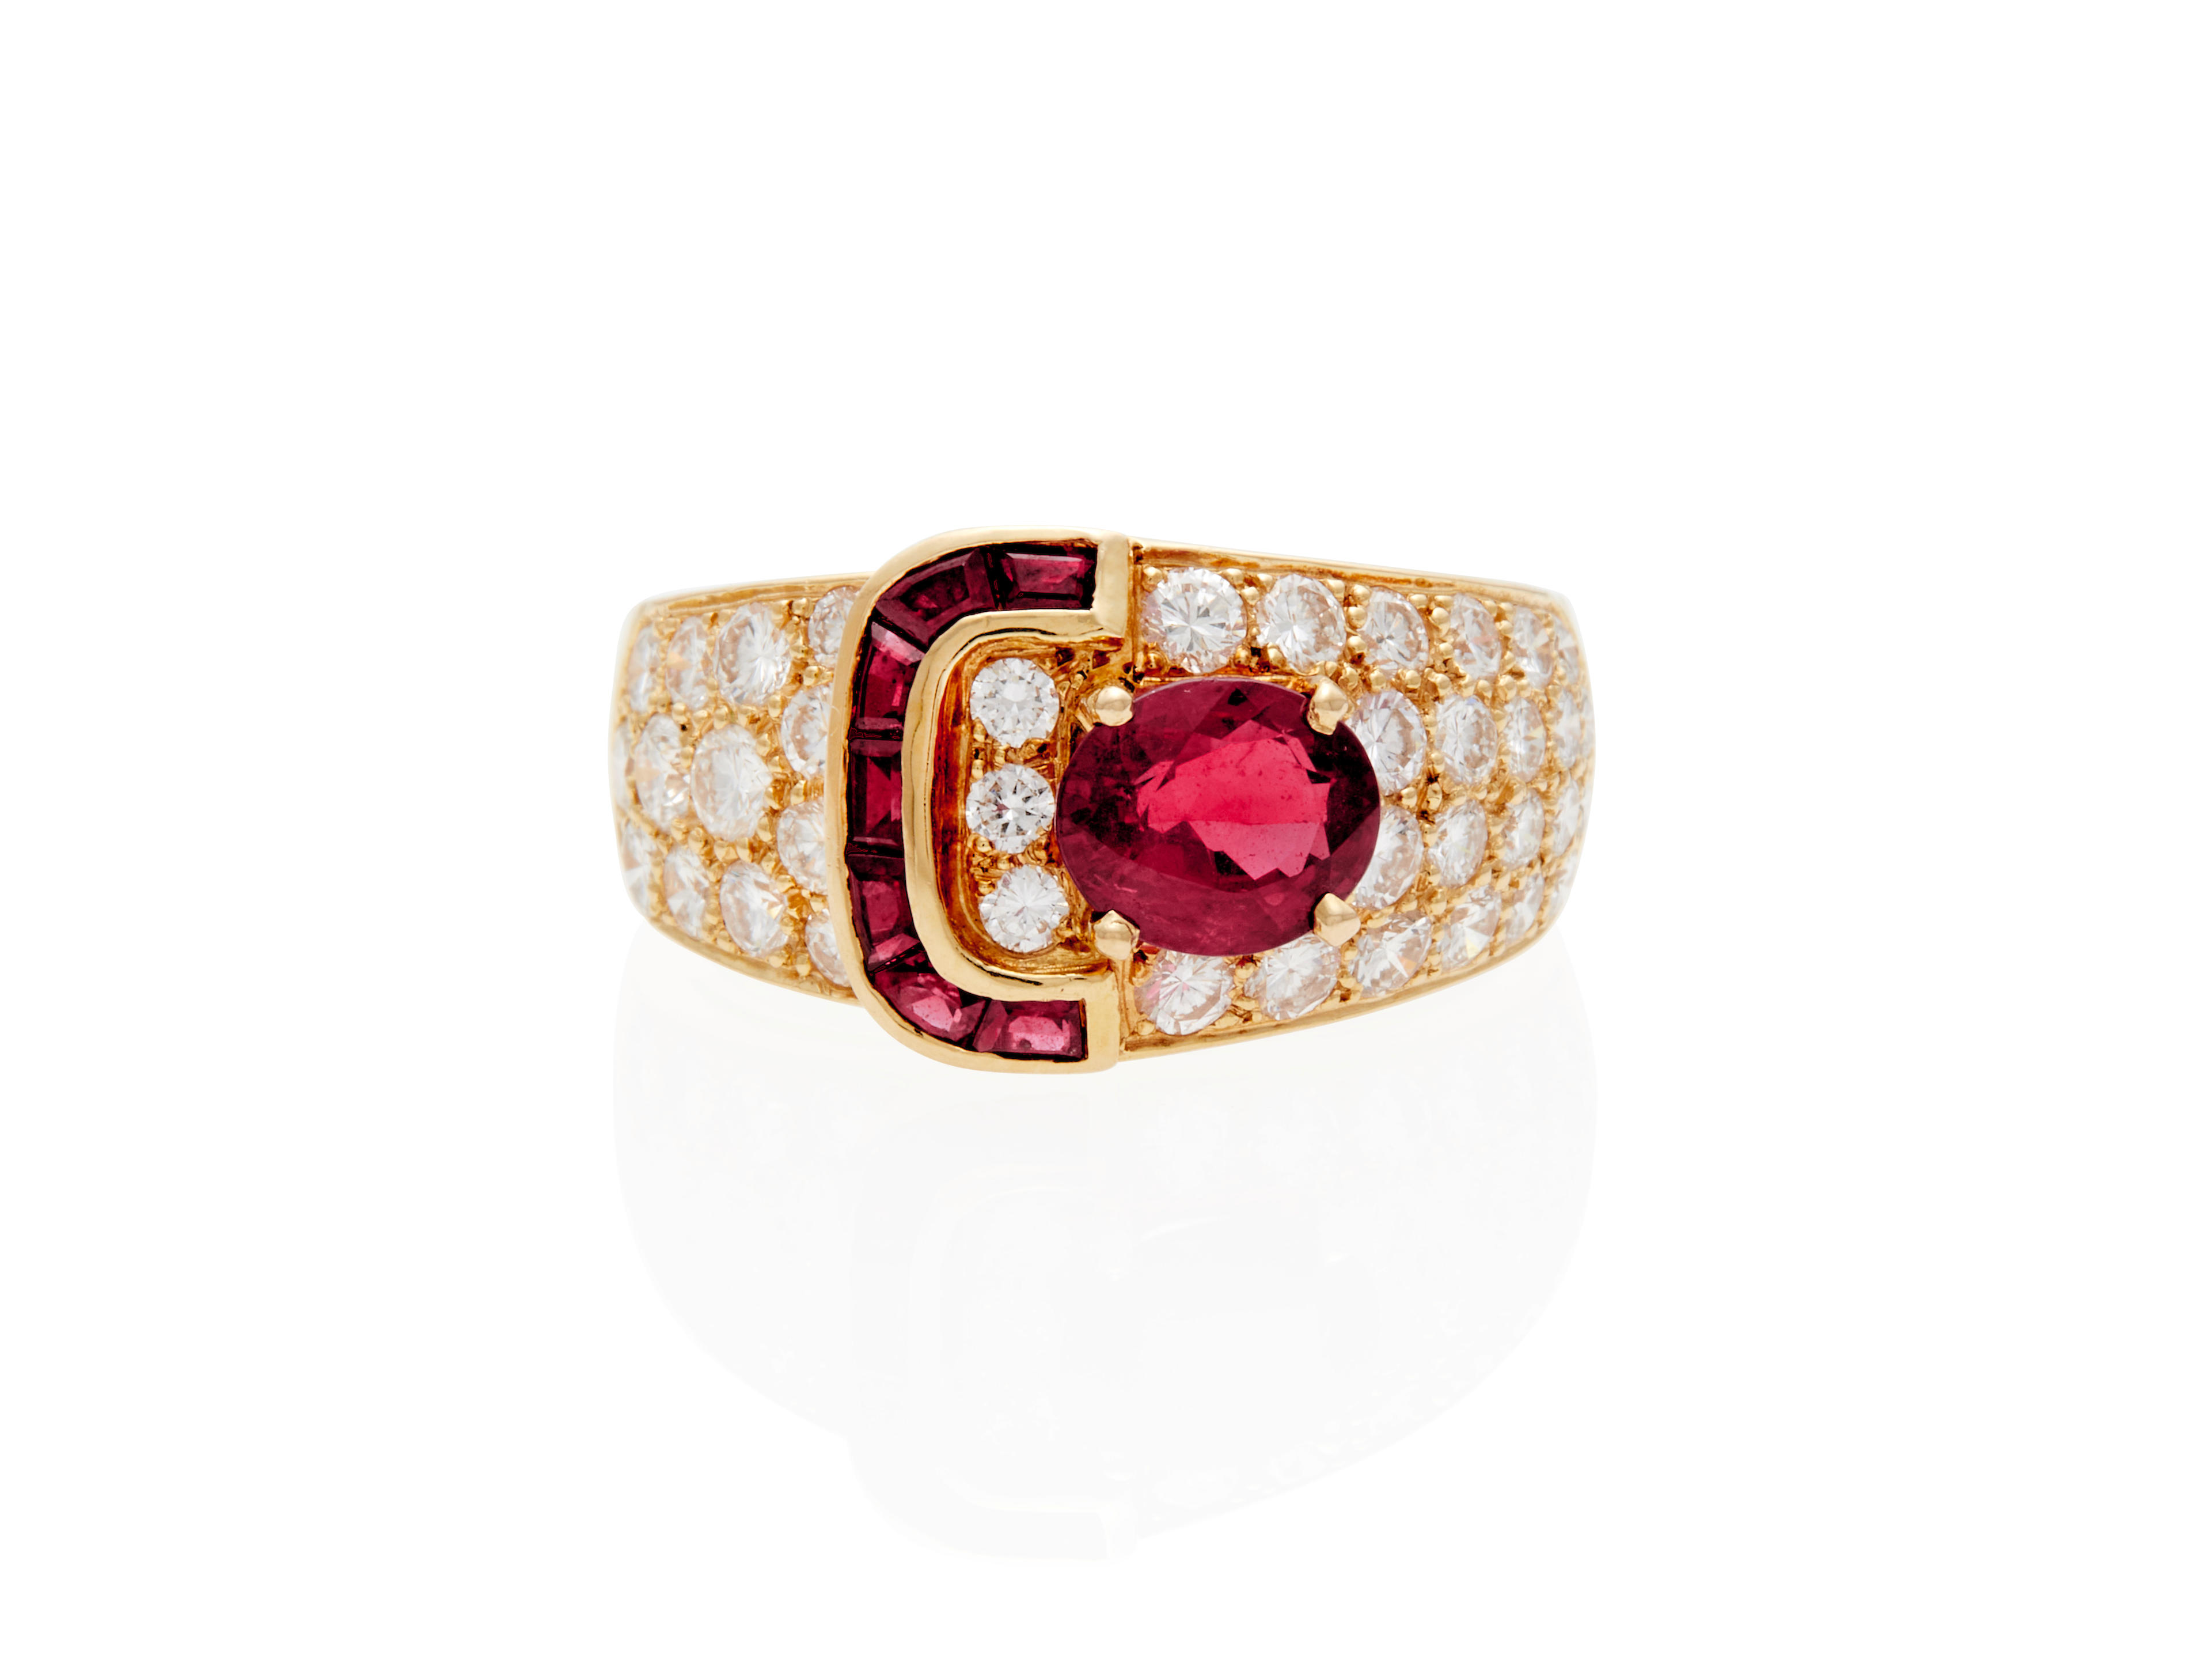 VAN CLEEF & ARPELS: A RUBY AND DIAMOND RING, FRANCE, CIRCA 1960